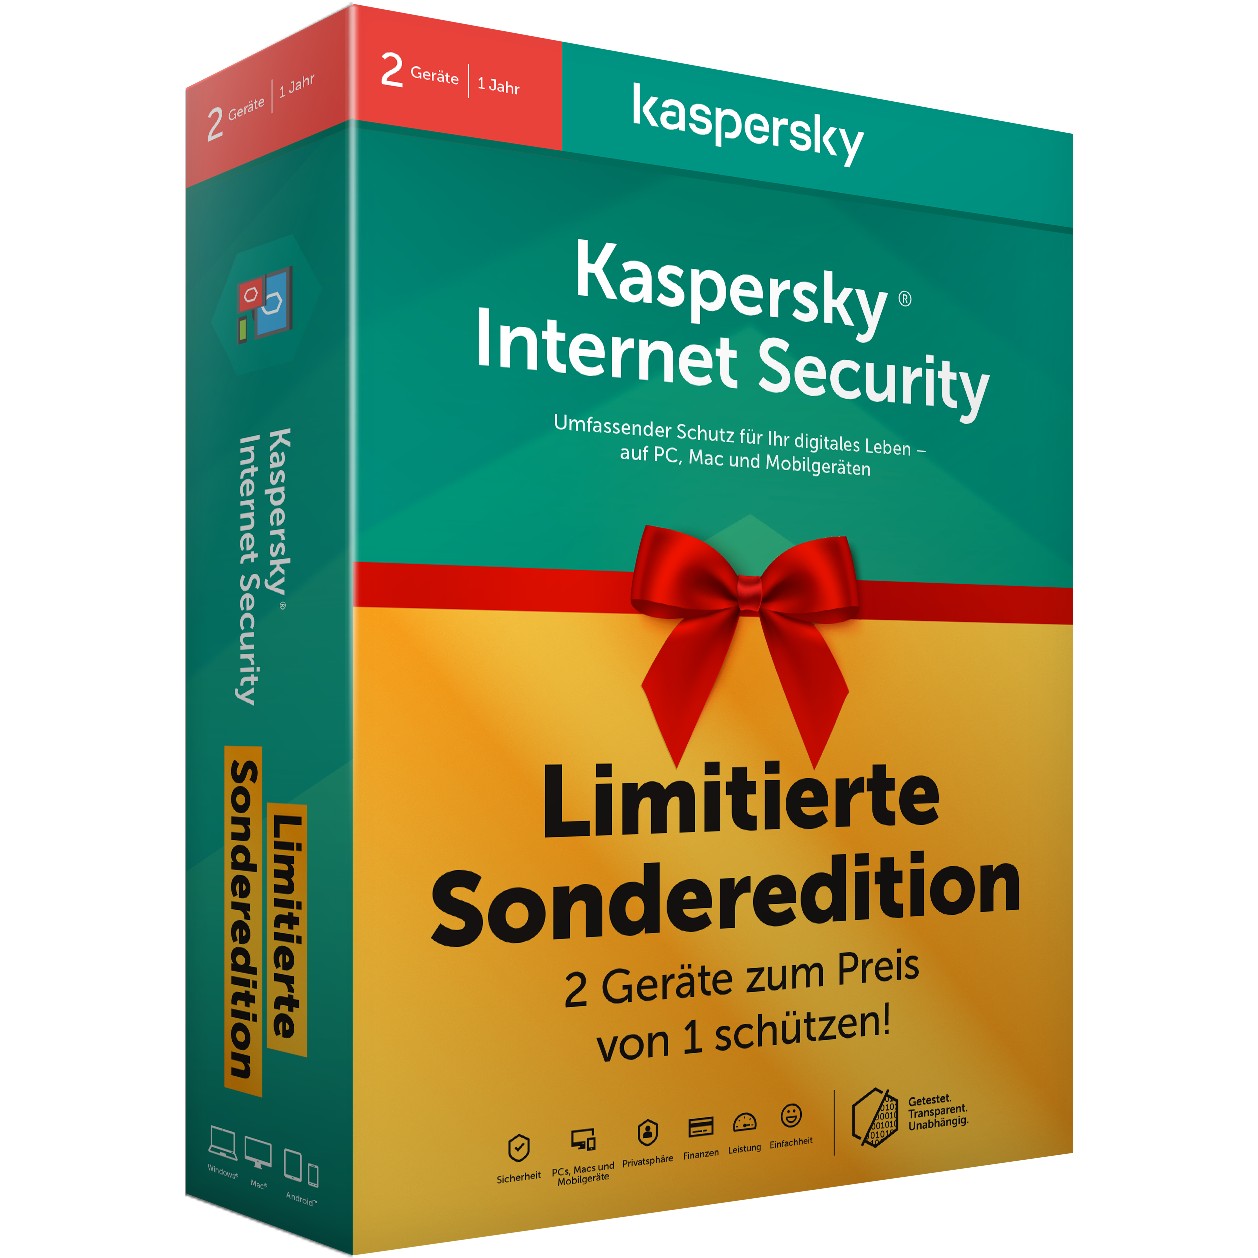 Internet Security - 2 Devices, 1 Year - Box - Limited Edition inkl. RFID Karte